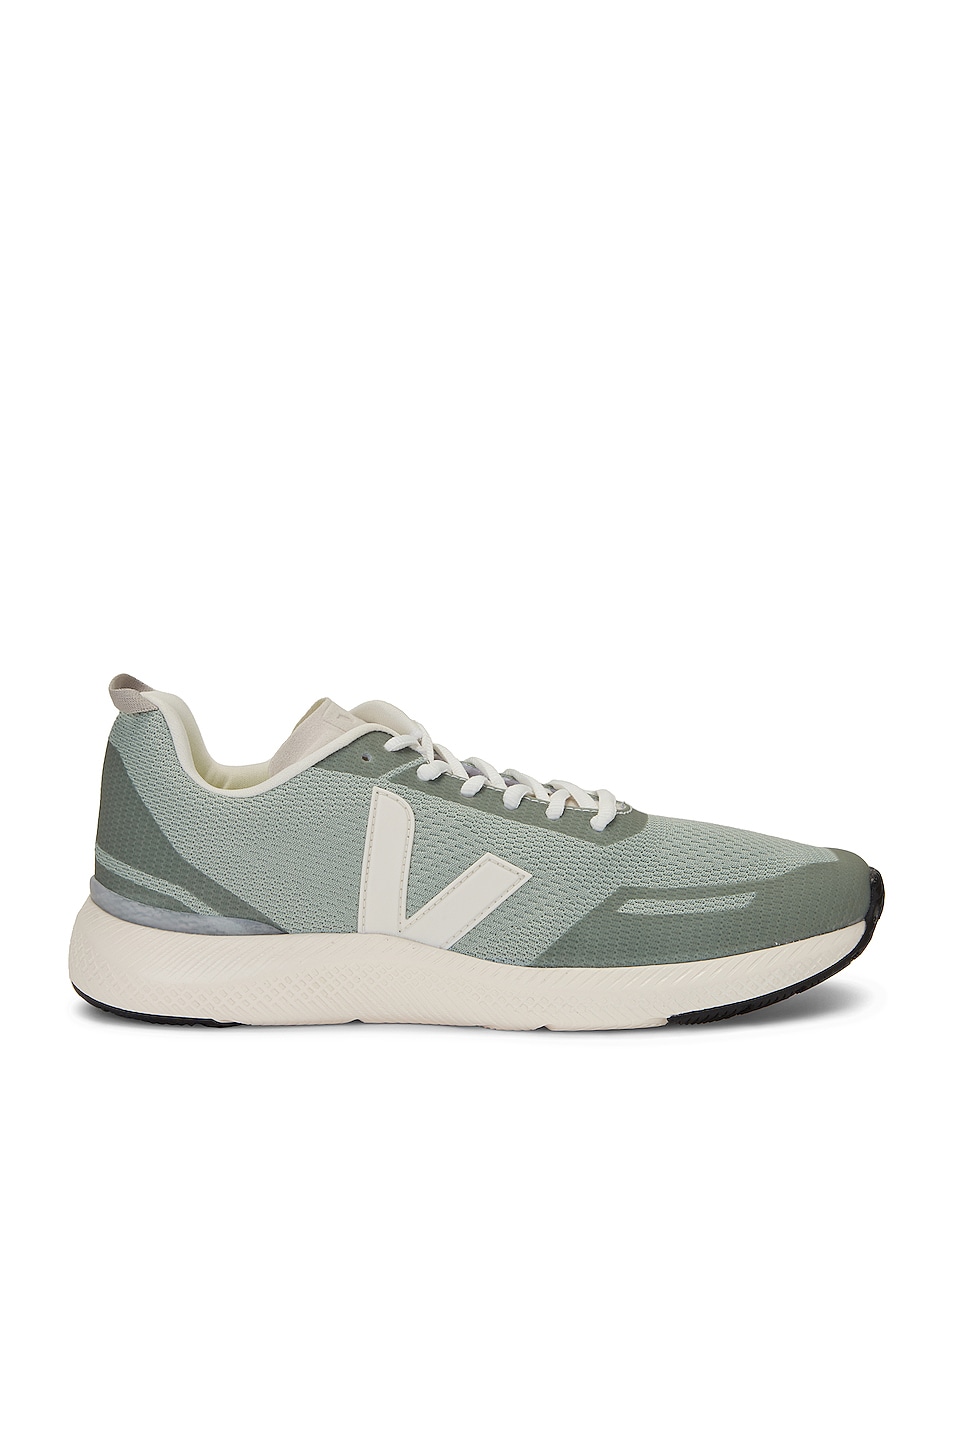 Image 1 of Veja Impala Sneakers in Matcha Cream